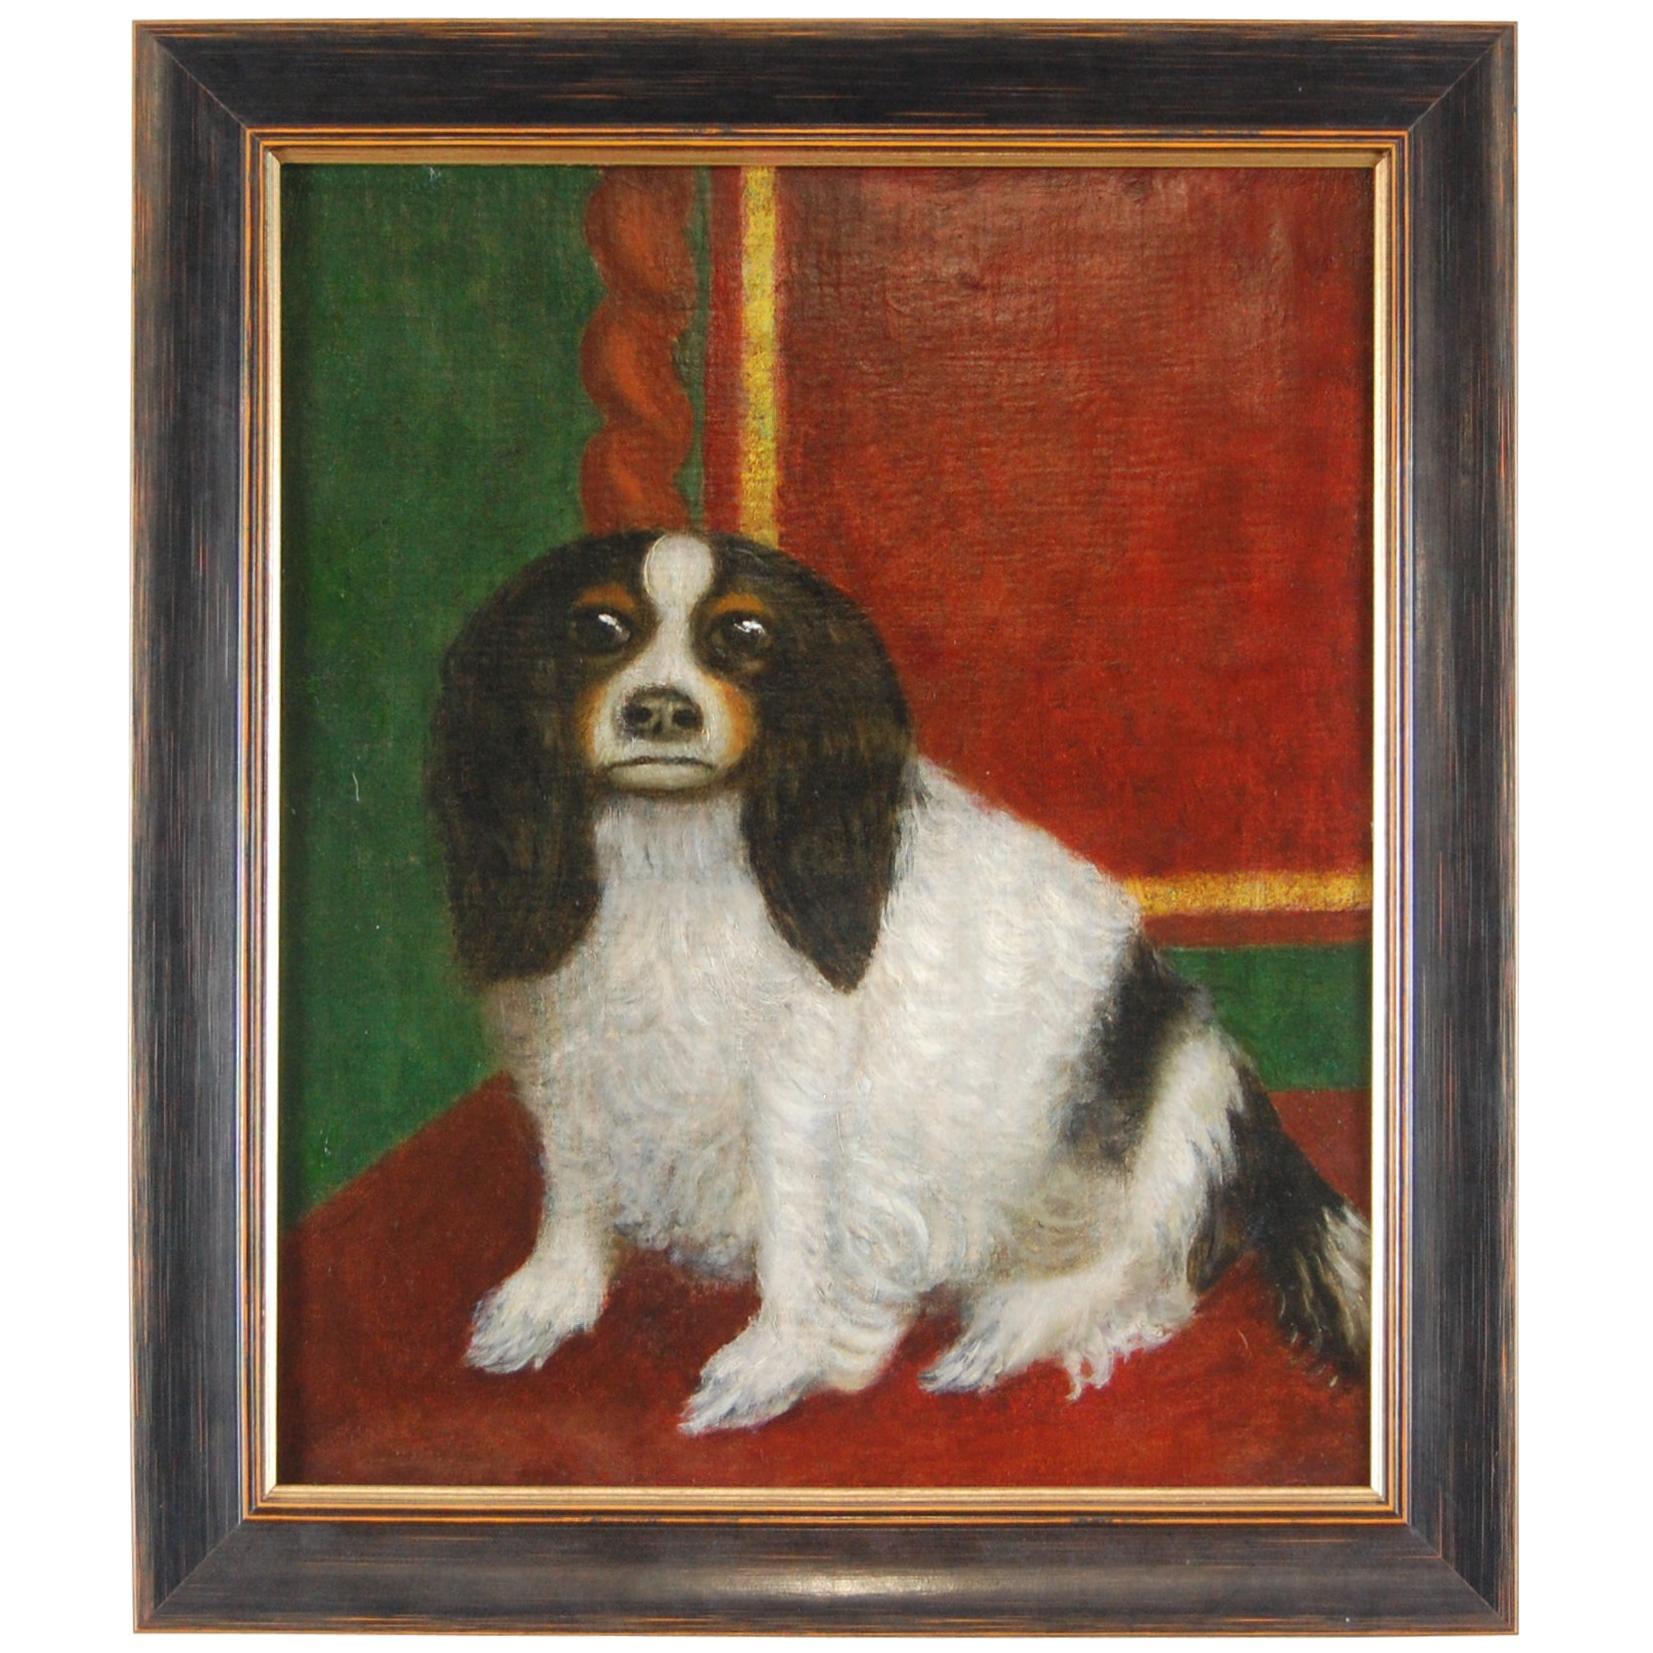 19th Century Oil on Canvas Portrait of a King Charles Spaniel